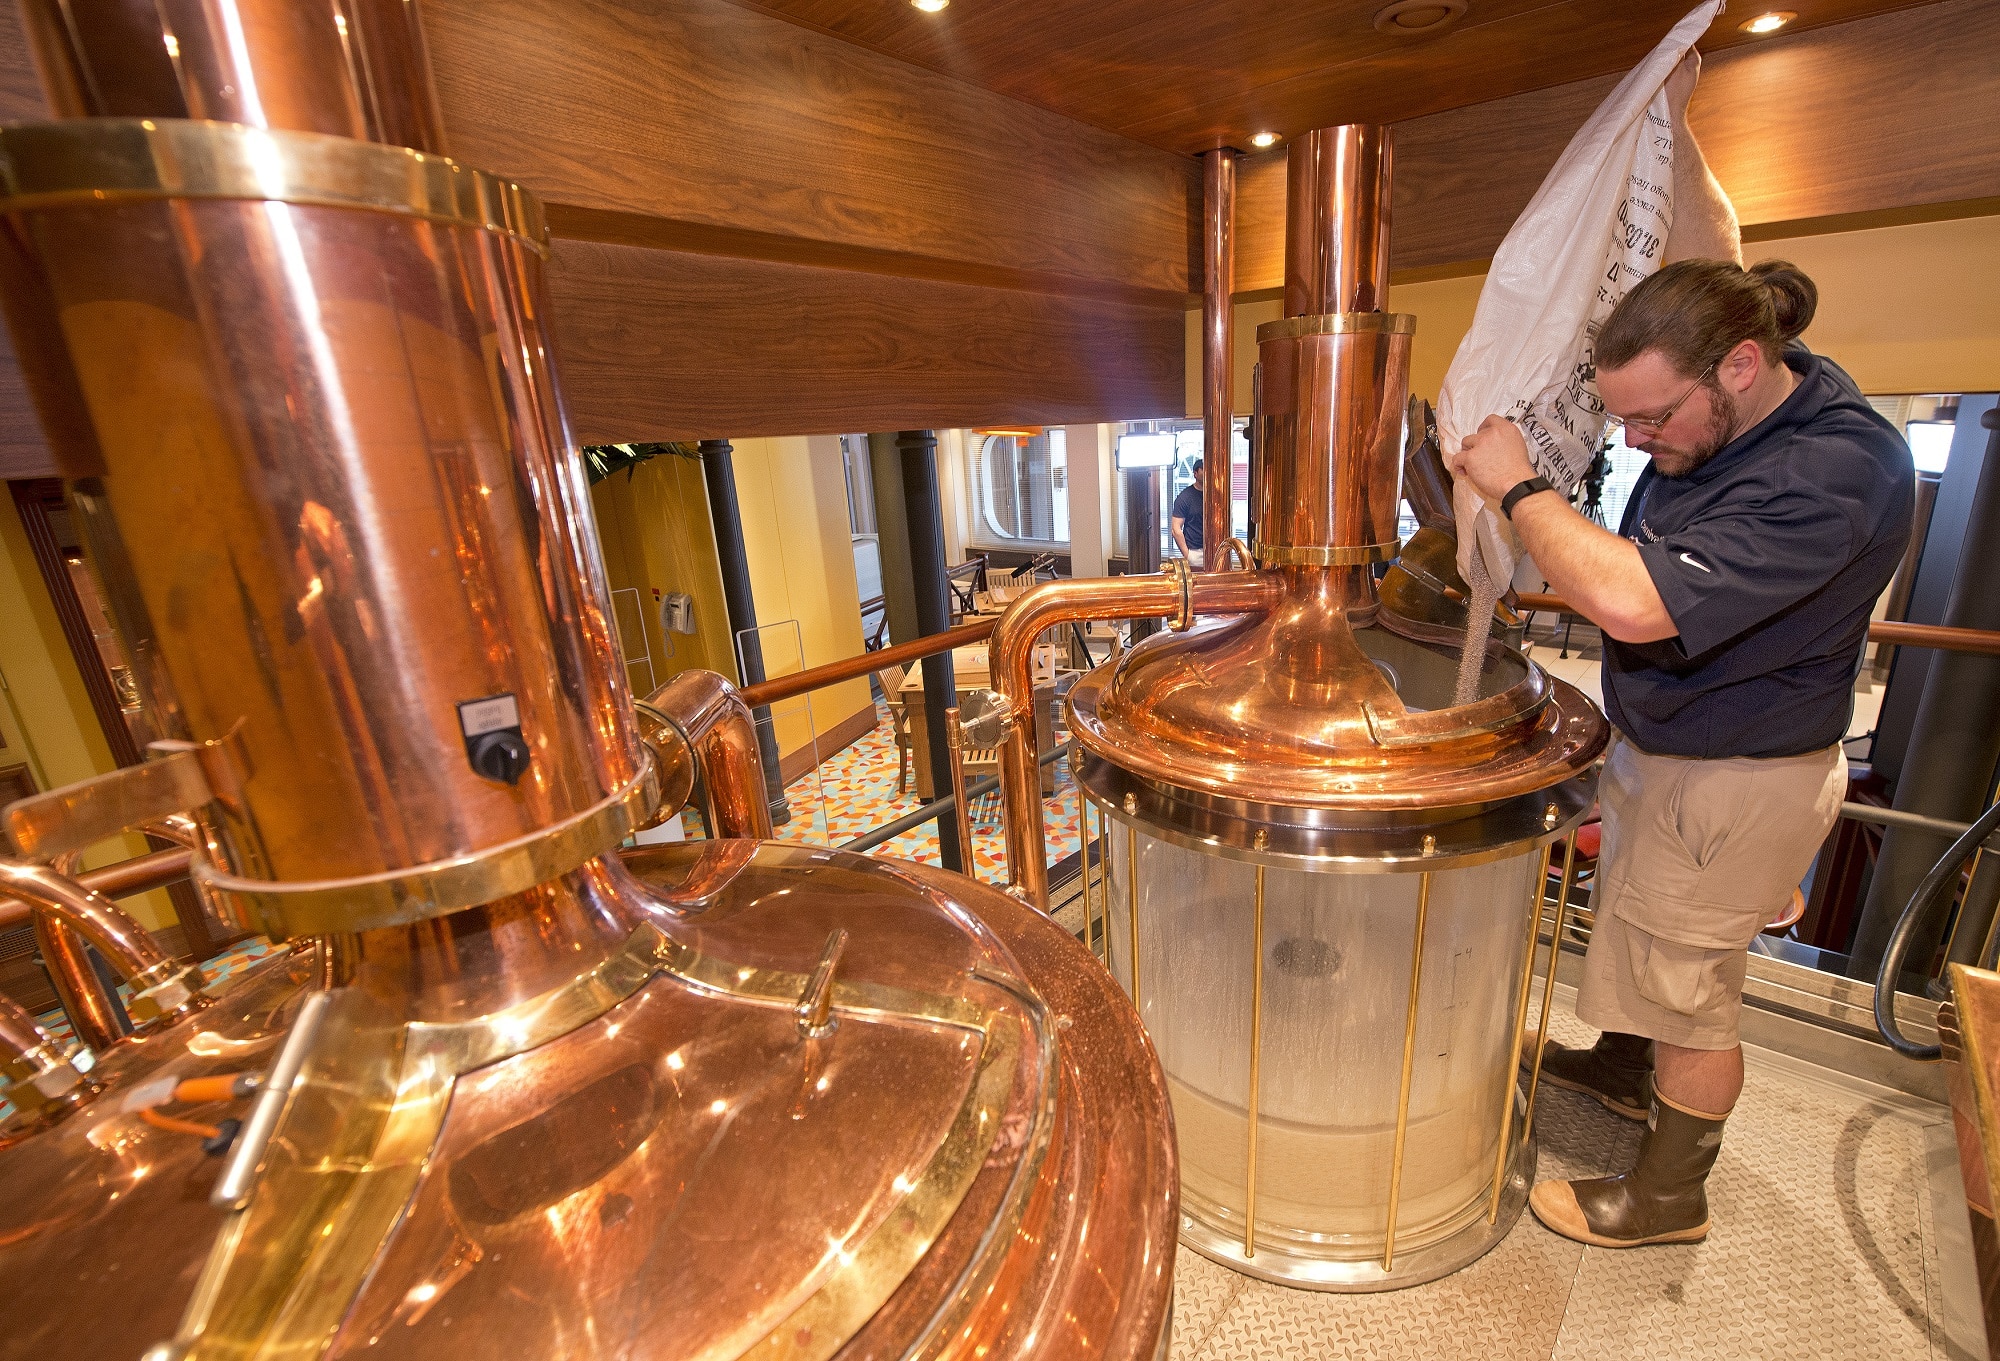 Carnival Vista Brewmaster Colin Presby pours malt into a mash tun located in the RedFrog Pub's brewery house onboard the Carnival Vista.